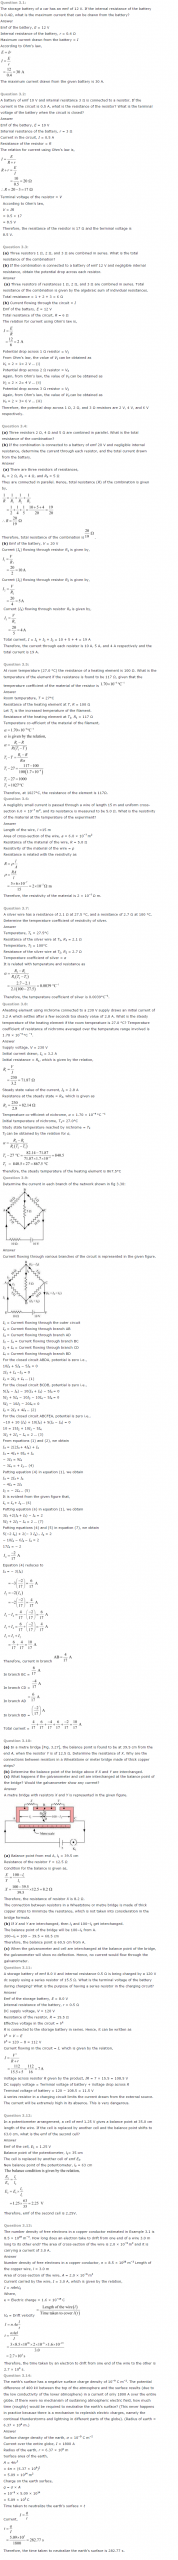 NCERT Solutions for Class 12 Physics Chapter 3 Current Electricity